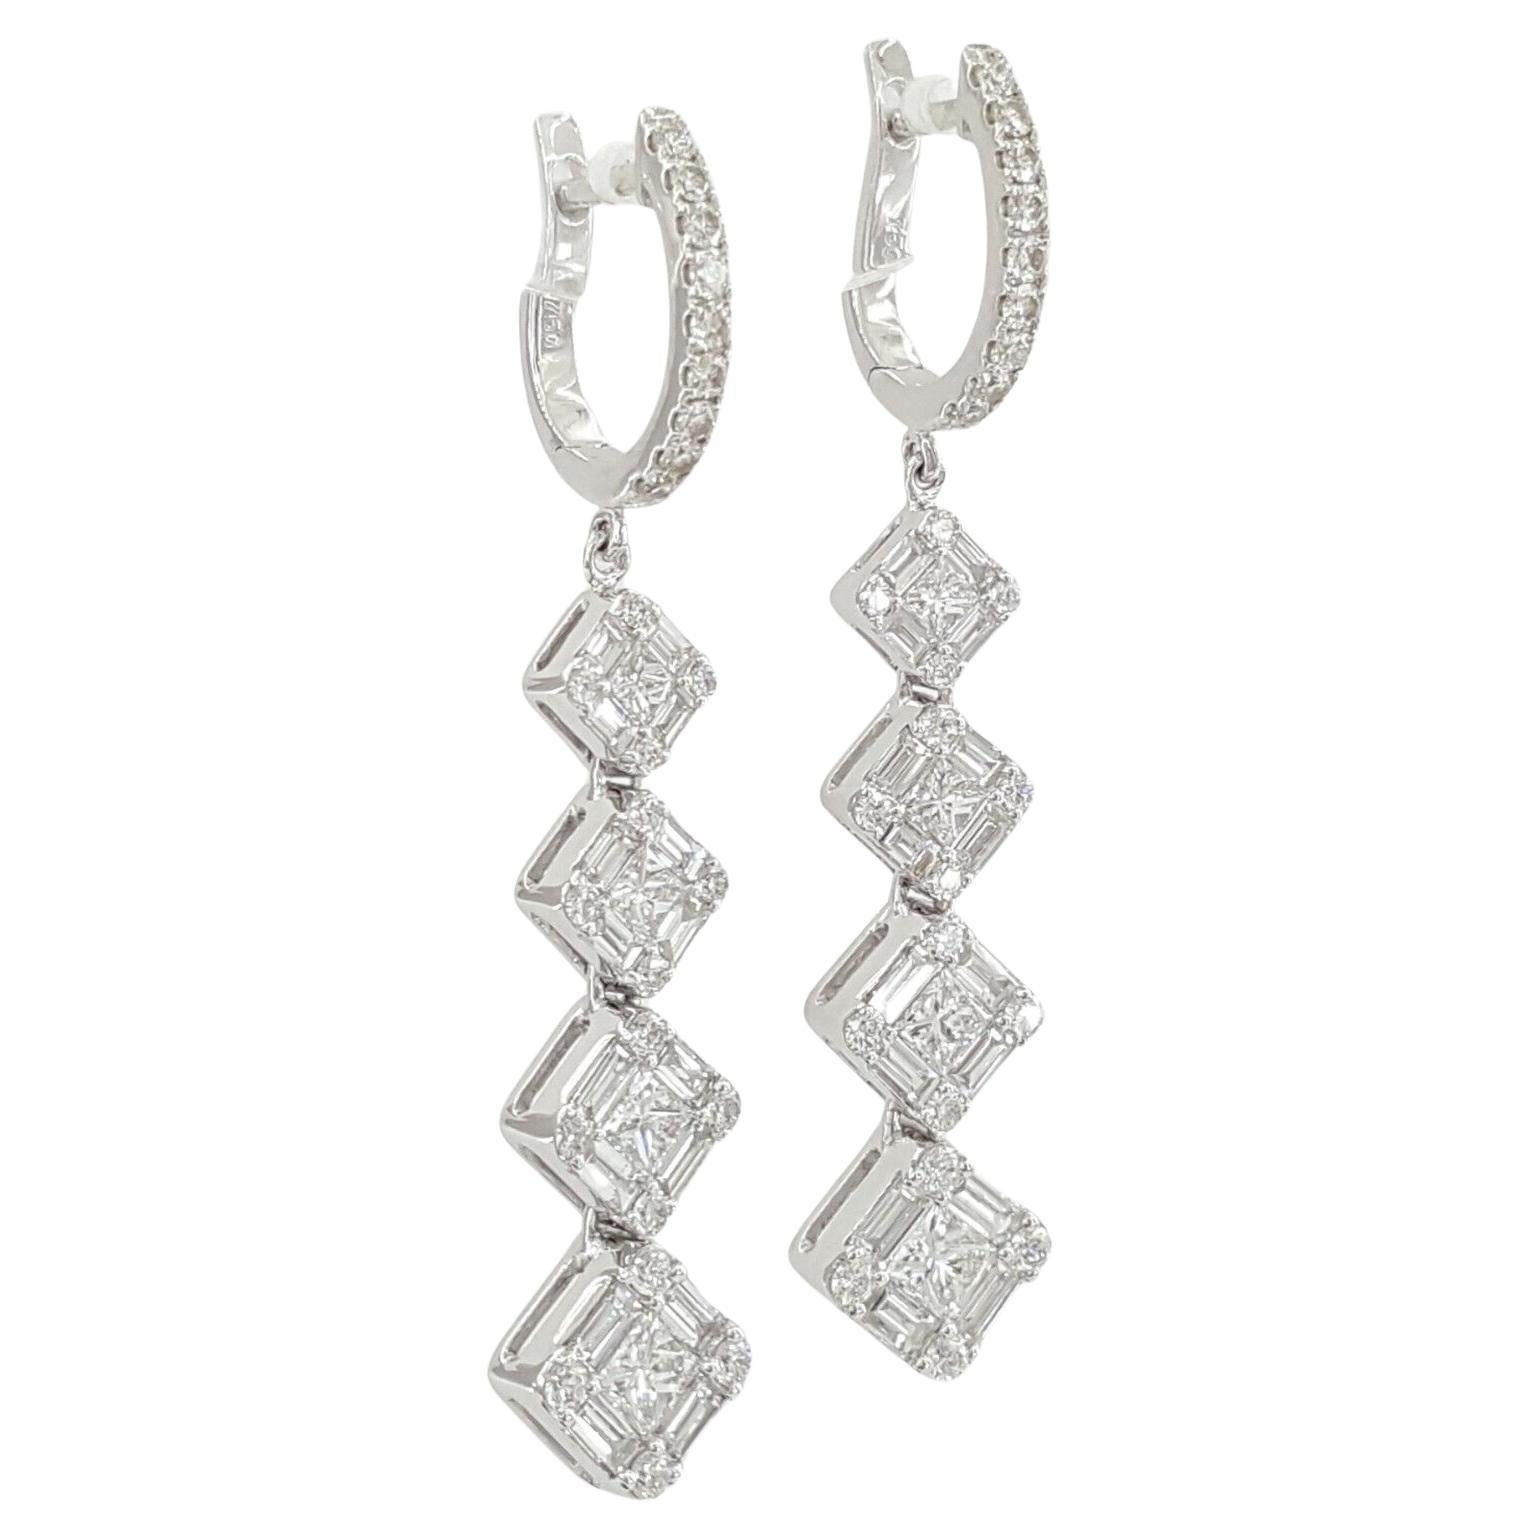 An exquisite pair of dangle earrings set in solid white gold.

the cuts are princess, baguette and round cut.

 There are 12 Natural Princess Cut Diamonds weighing approximately 0.2 ct total weight, E-G in color and VS1-VS2 in clarity. 



18